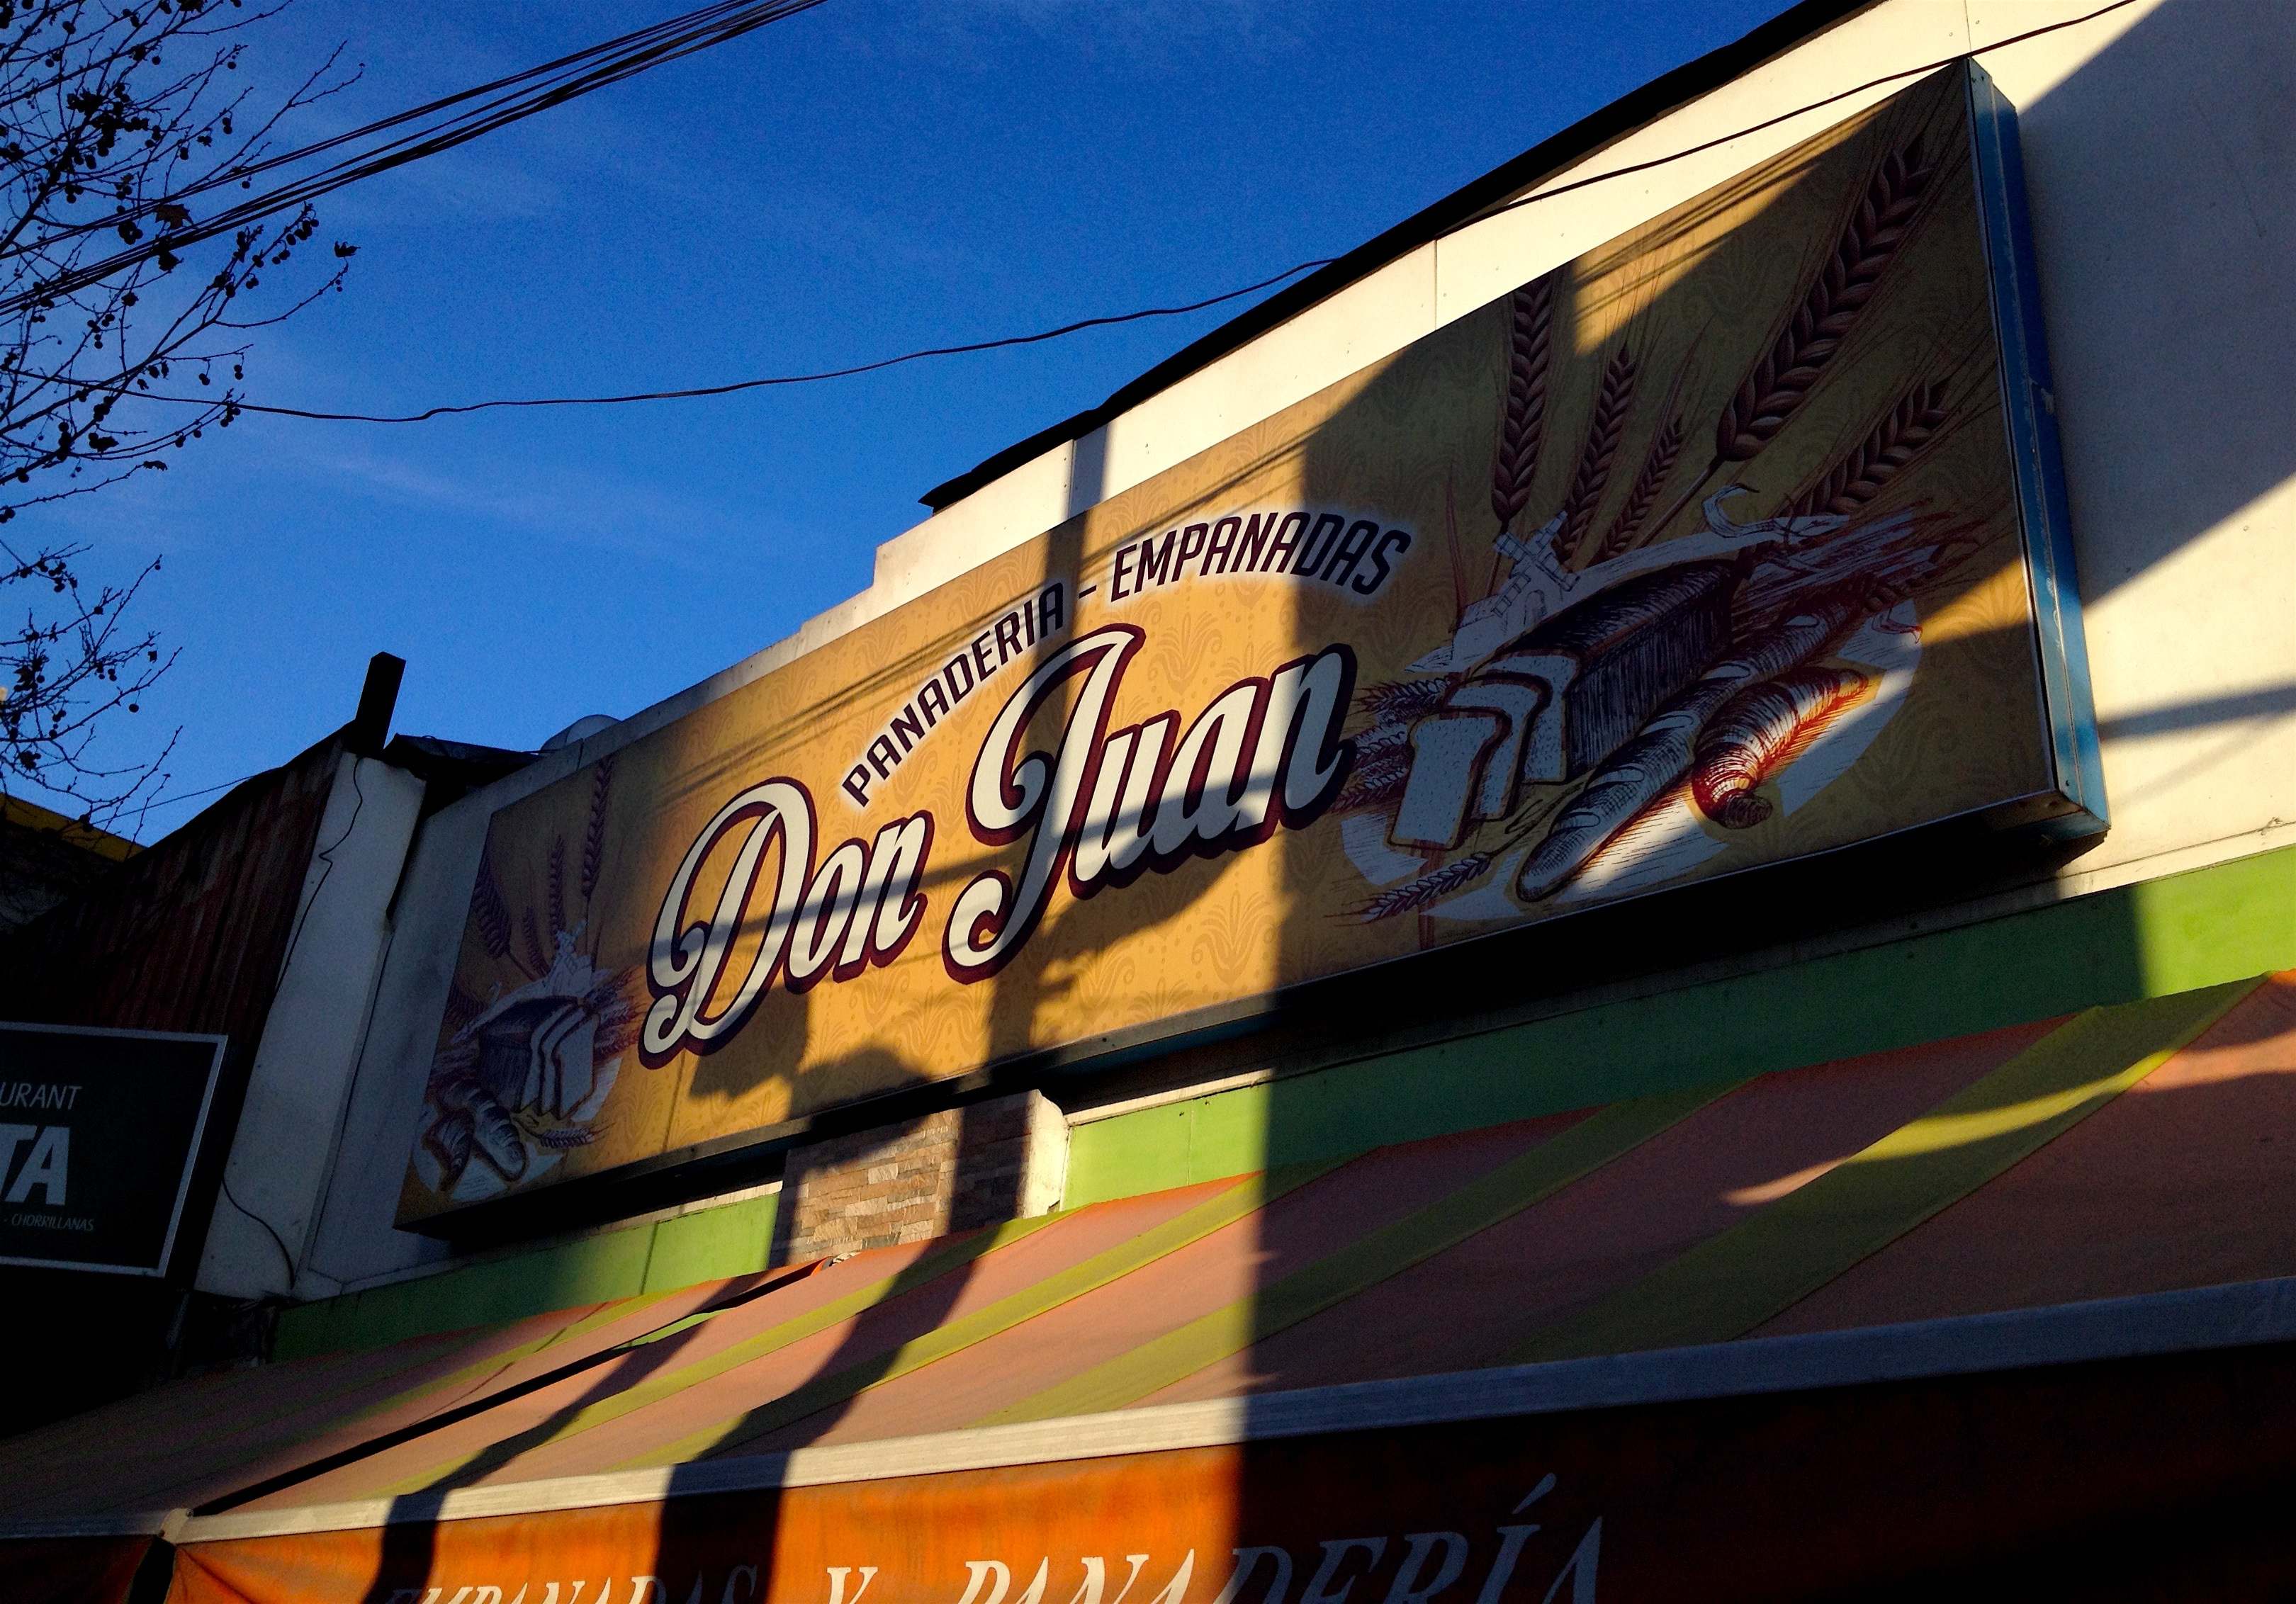 Don Juan's Pizza and Empanadas in Santiago, Chile near the Central Bus Station. photo: snowbrains